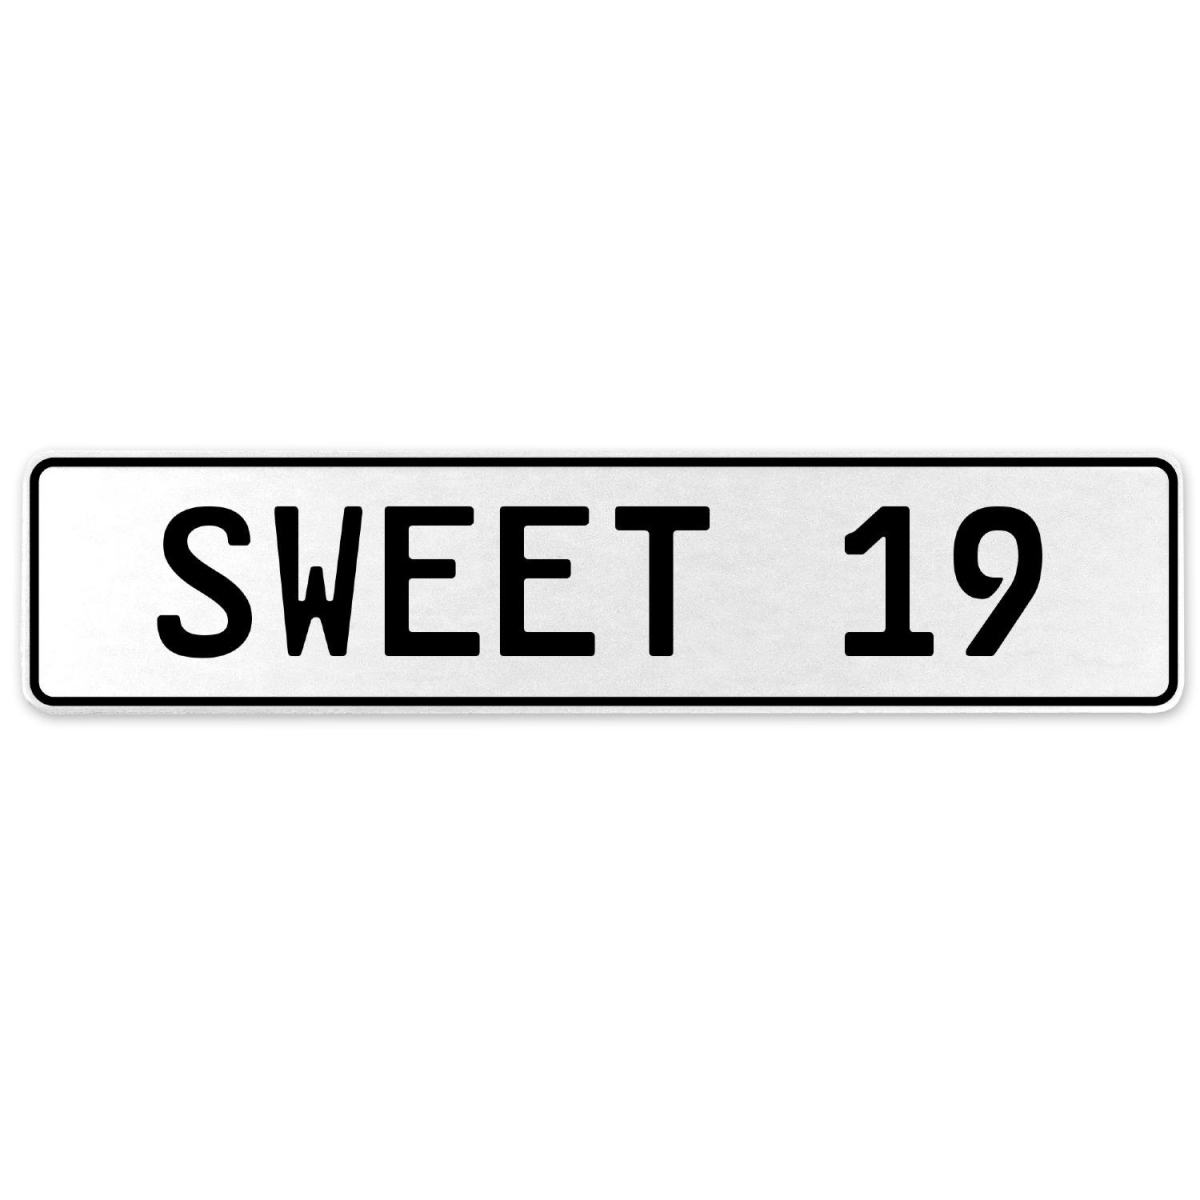 554121 Sweet 19 - White Aluminum Street Sign Mancave Euro Plate Name Door Sign Wall